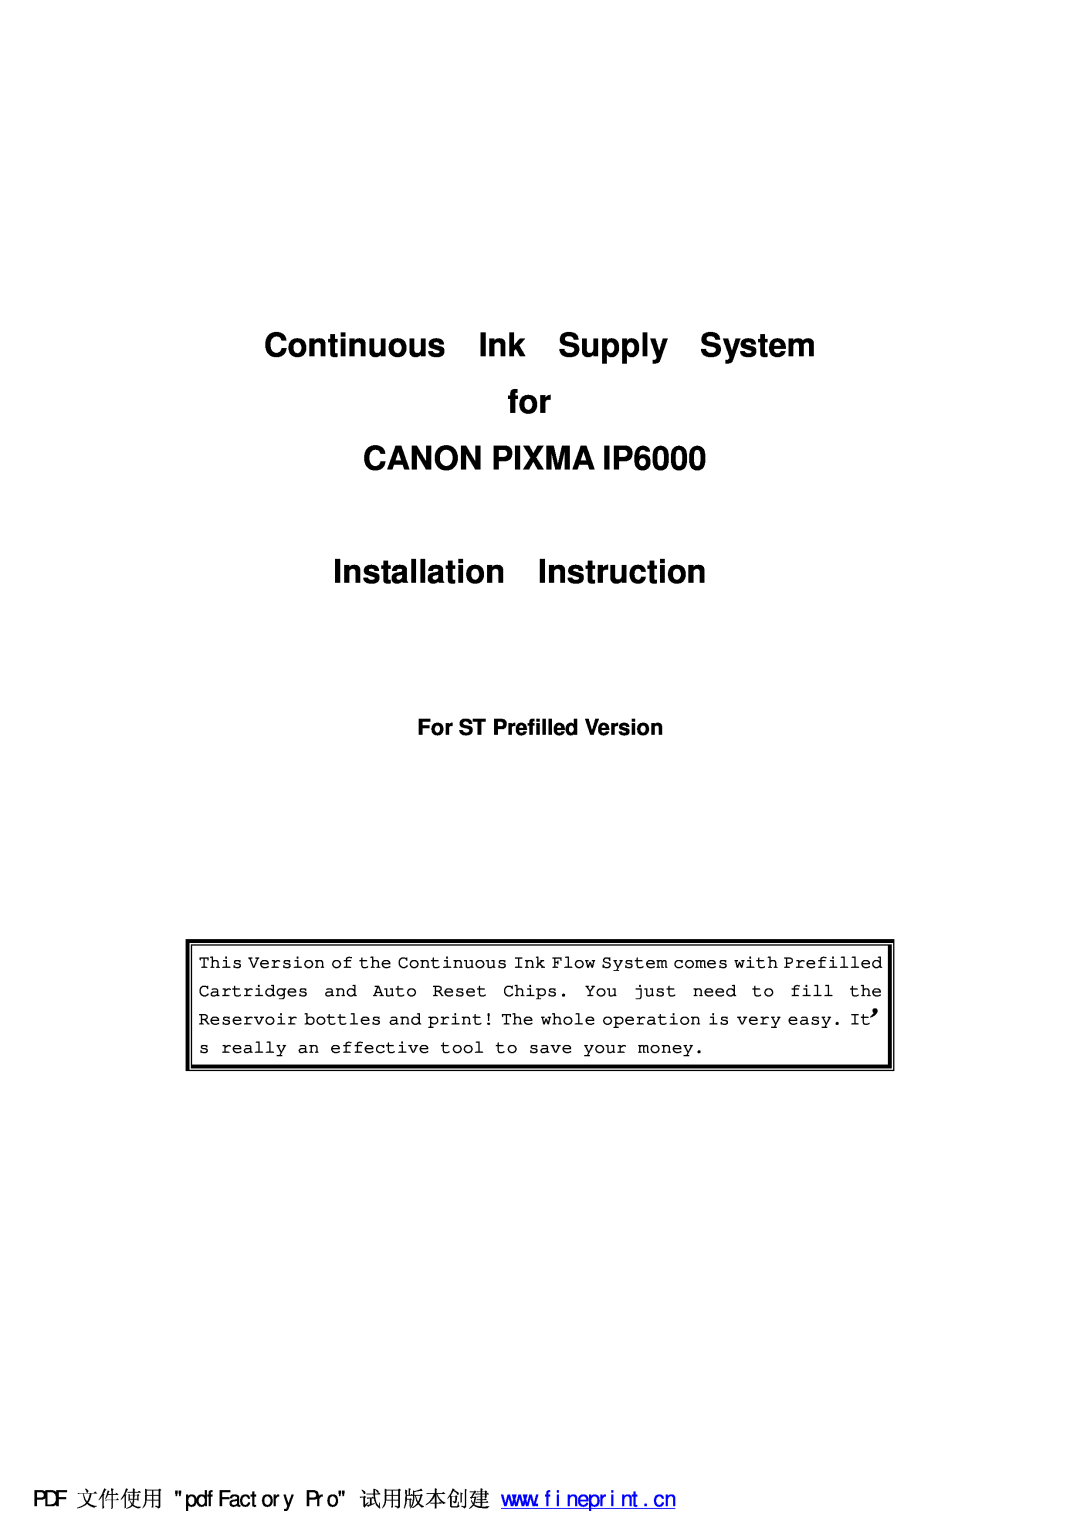 Canon Canon Pixma IP6000 manual For ST Prefilled Version, Continuous Ink Supply System for CANON PIXMA IP6000 